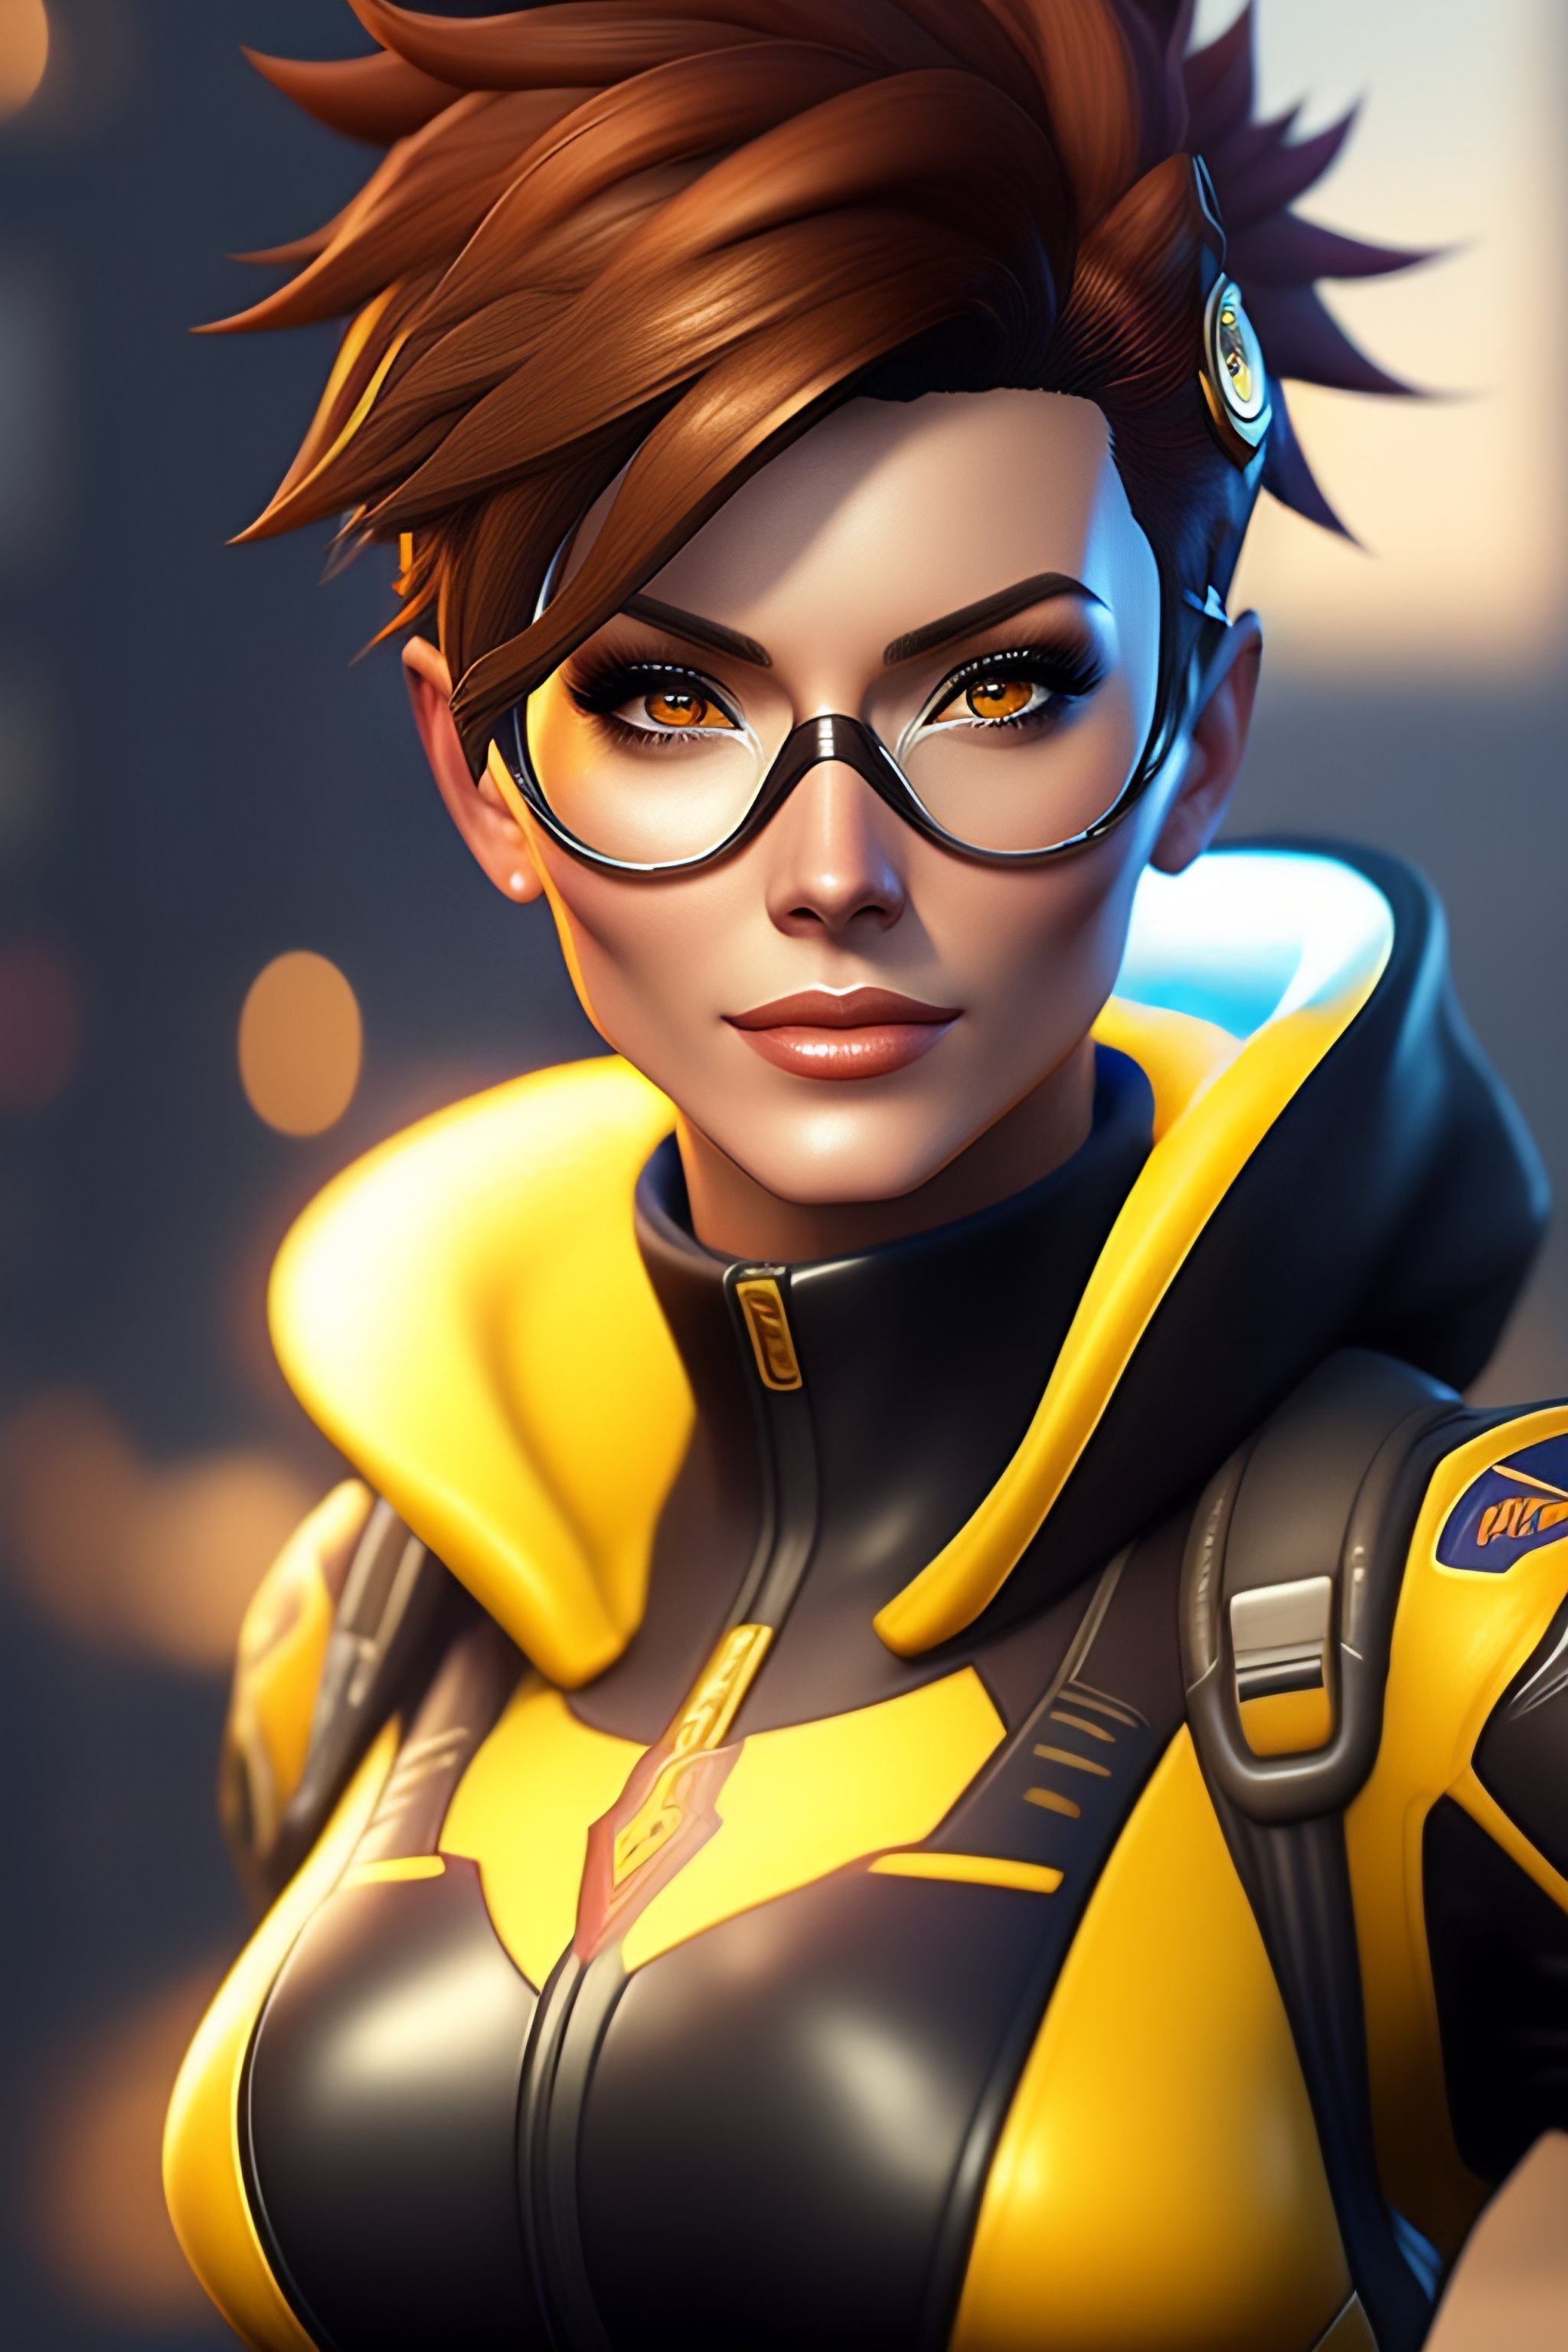 Lexica - Tracer from Overwatch at sixty years of age